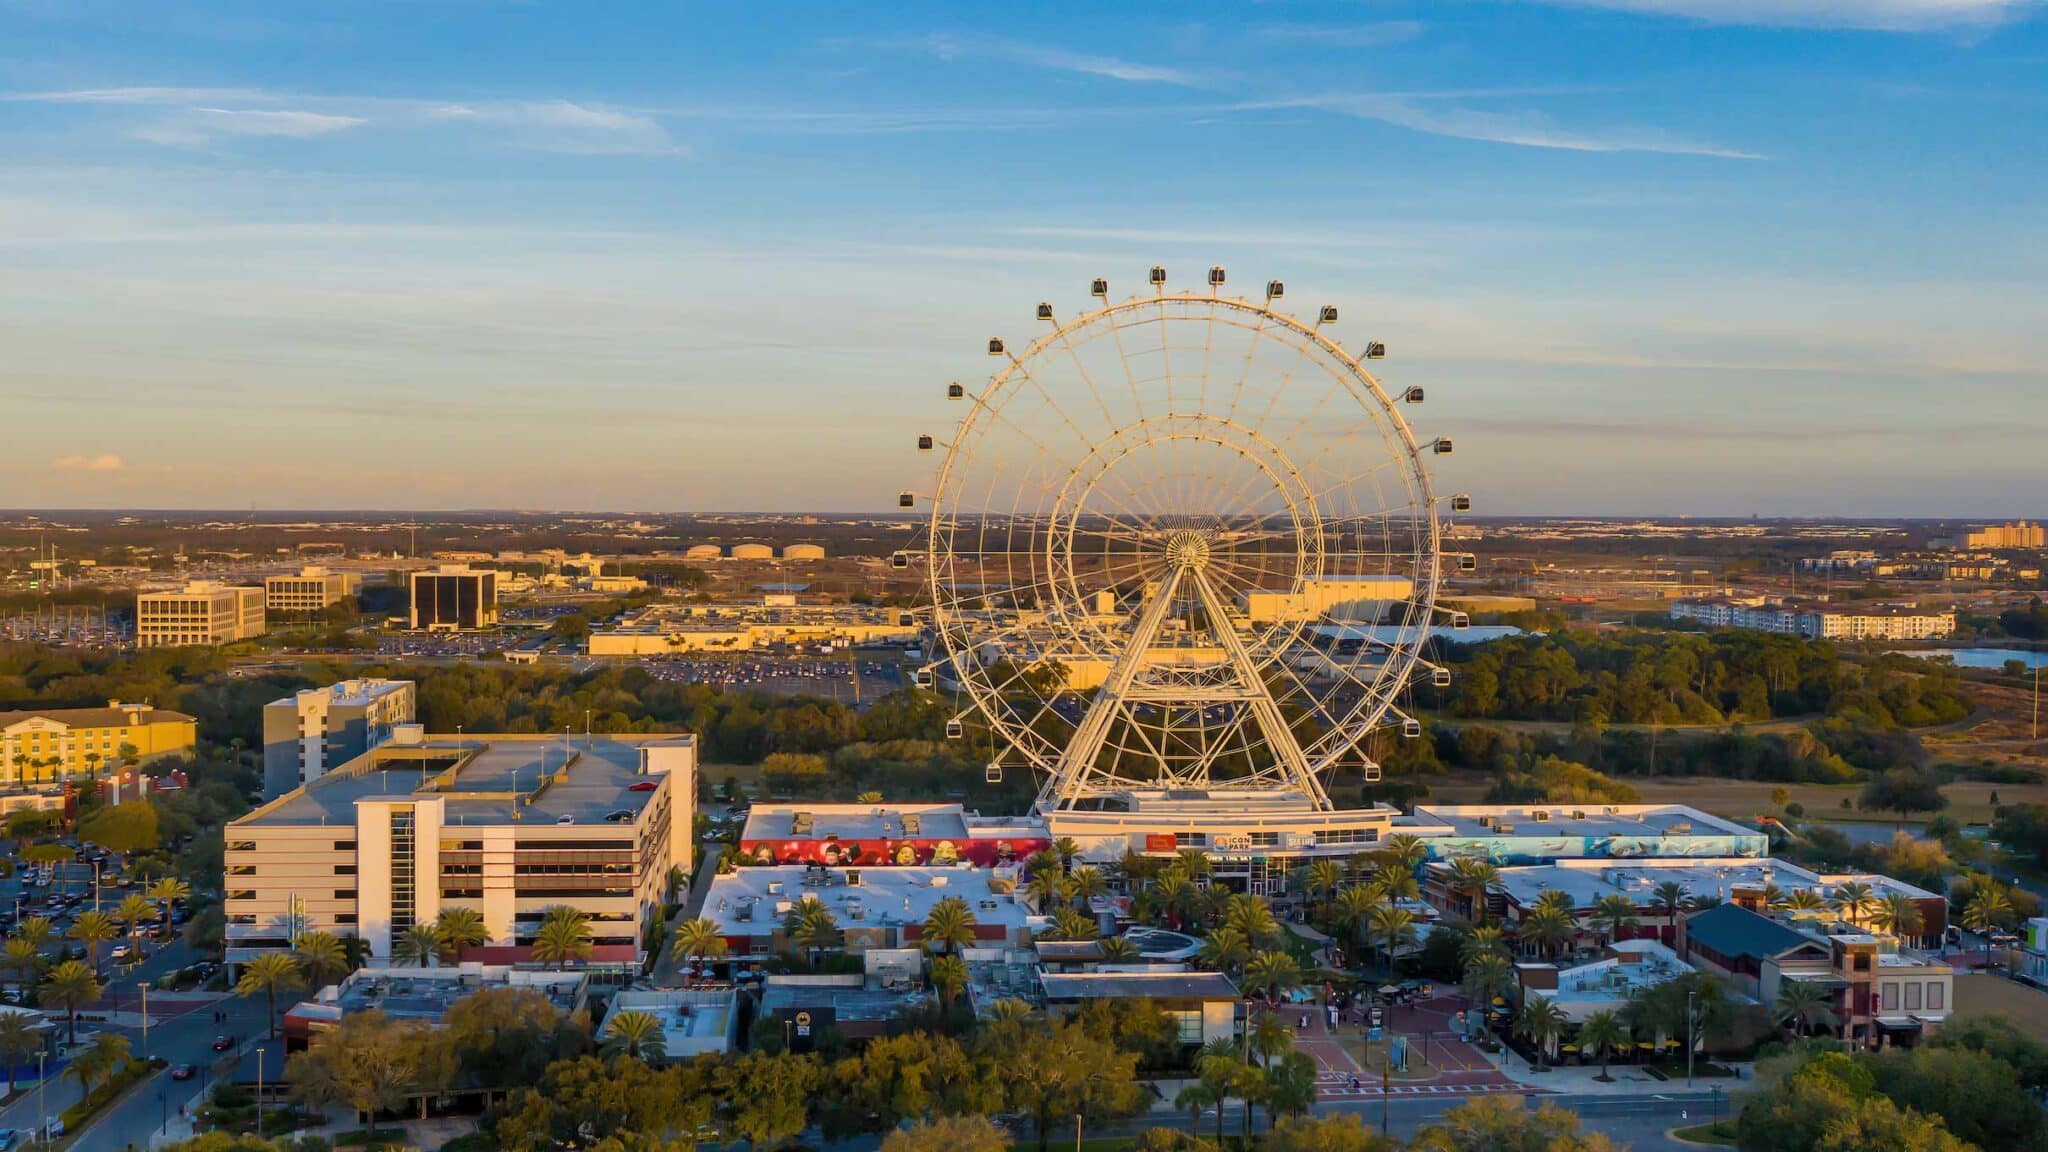 The Wheel at ICON Park attracts locals and visitors alike to International Drive.